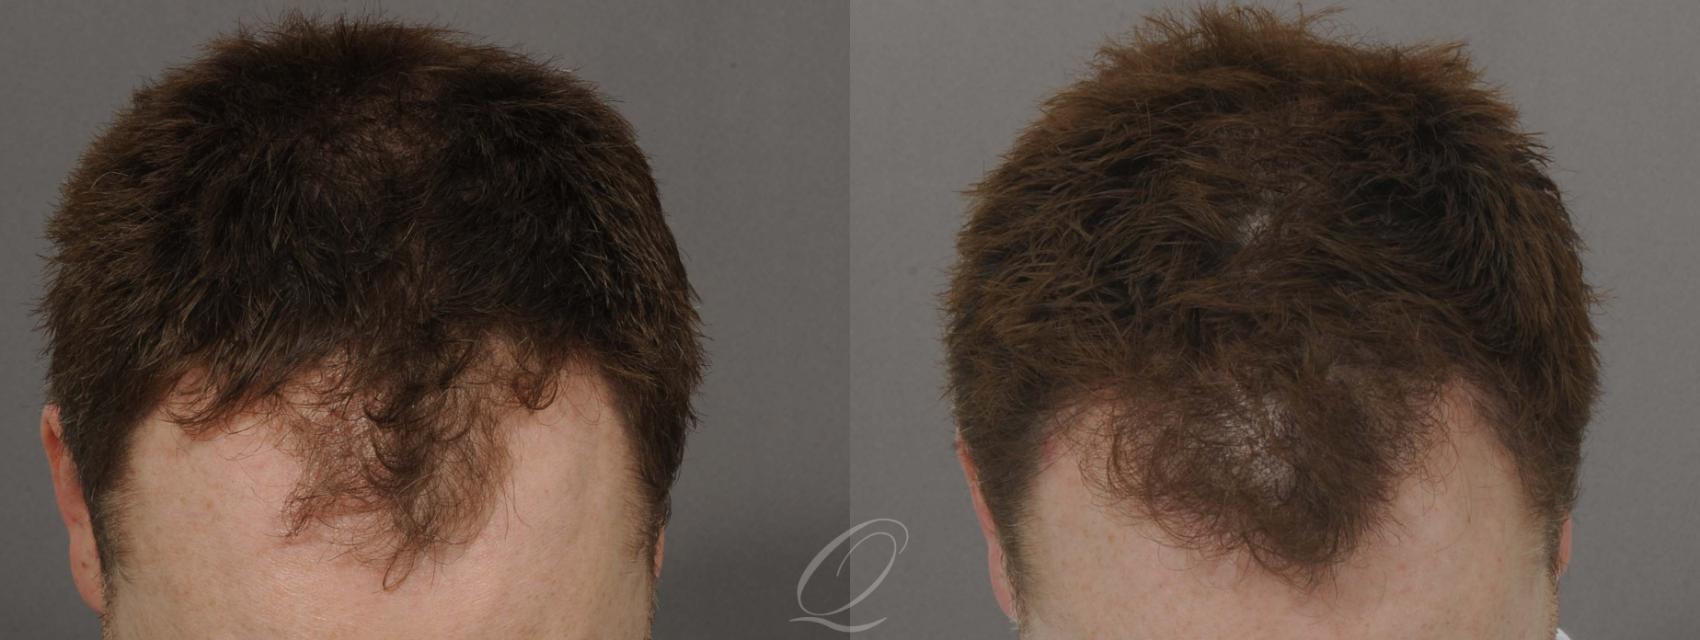 FUT Case 1027 Before & After View #1 | Rochester, Buffalo, & Syracuse, NY | Quatela Center for Hair Restoration